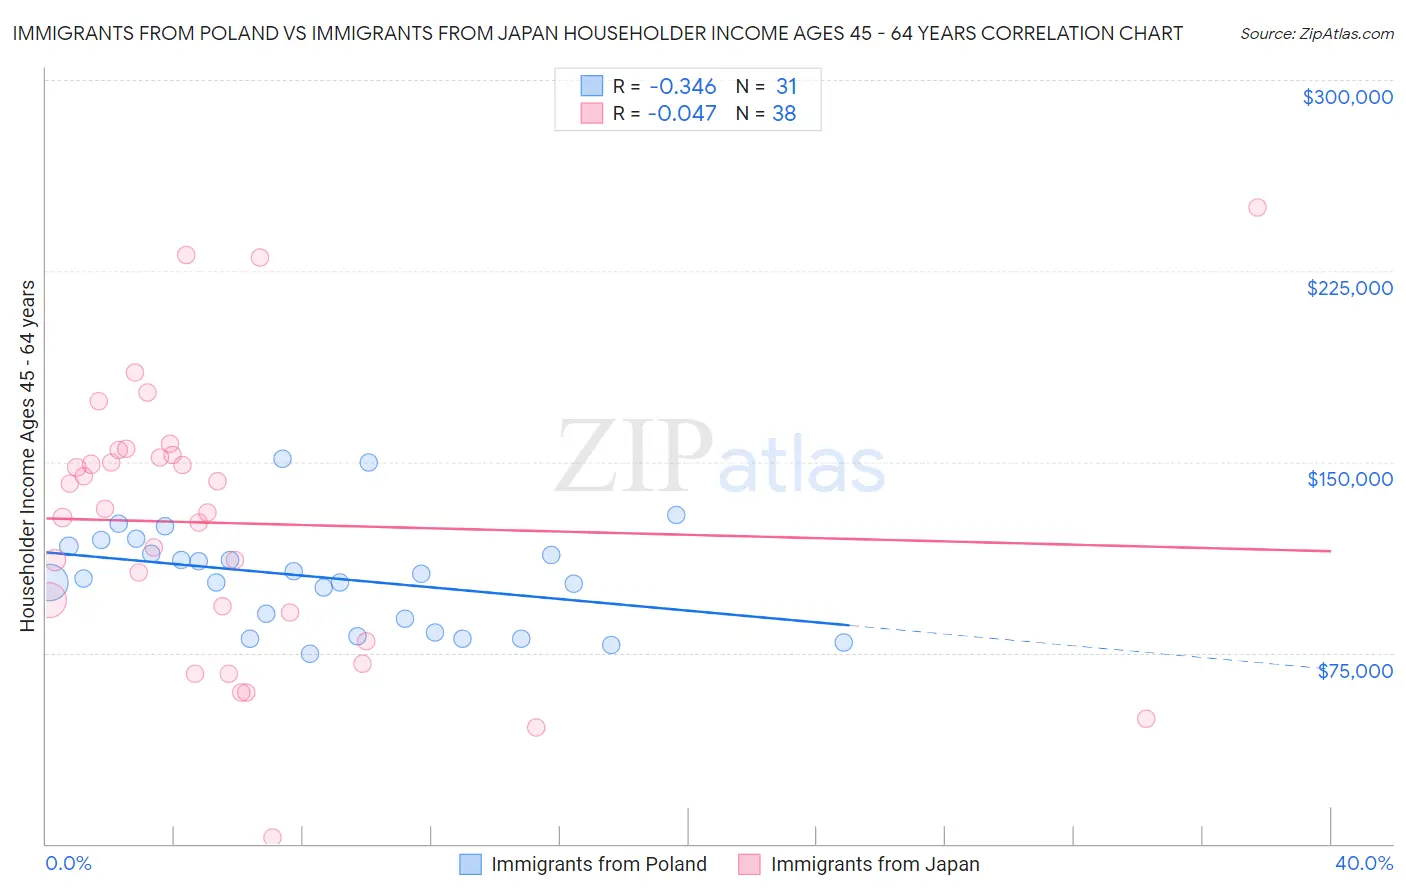 Immigrants from Poland vs Immigrants from Japan Householder Income Ages 45 - 64 years